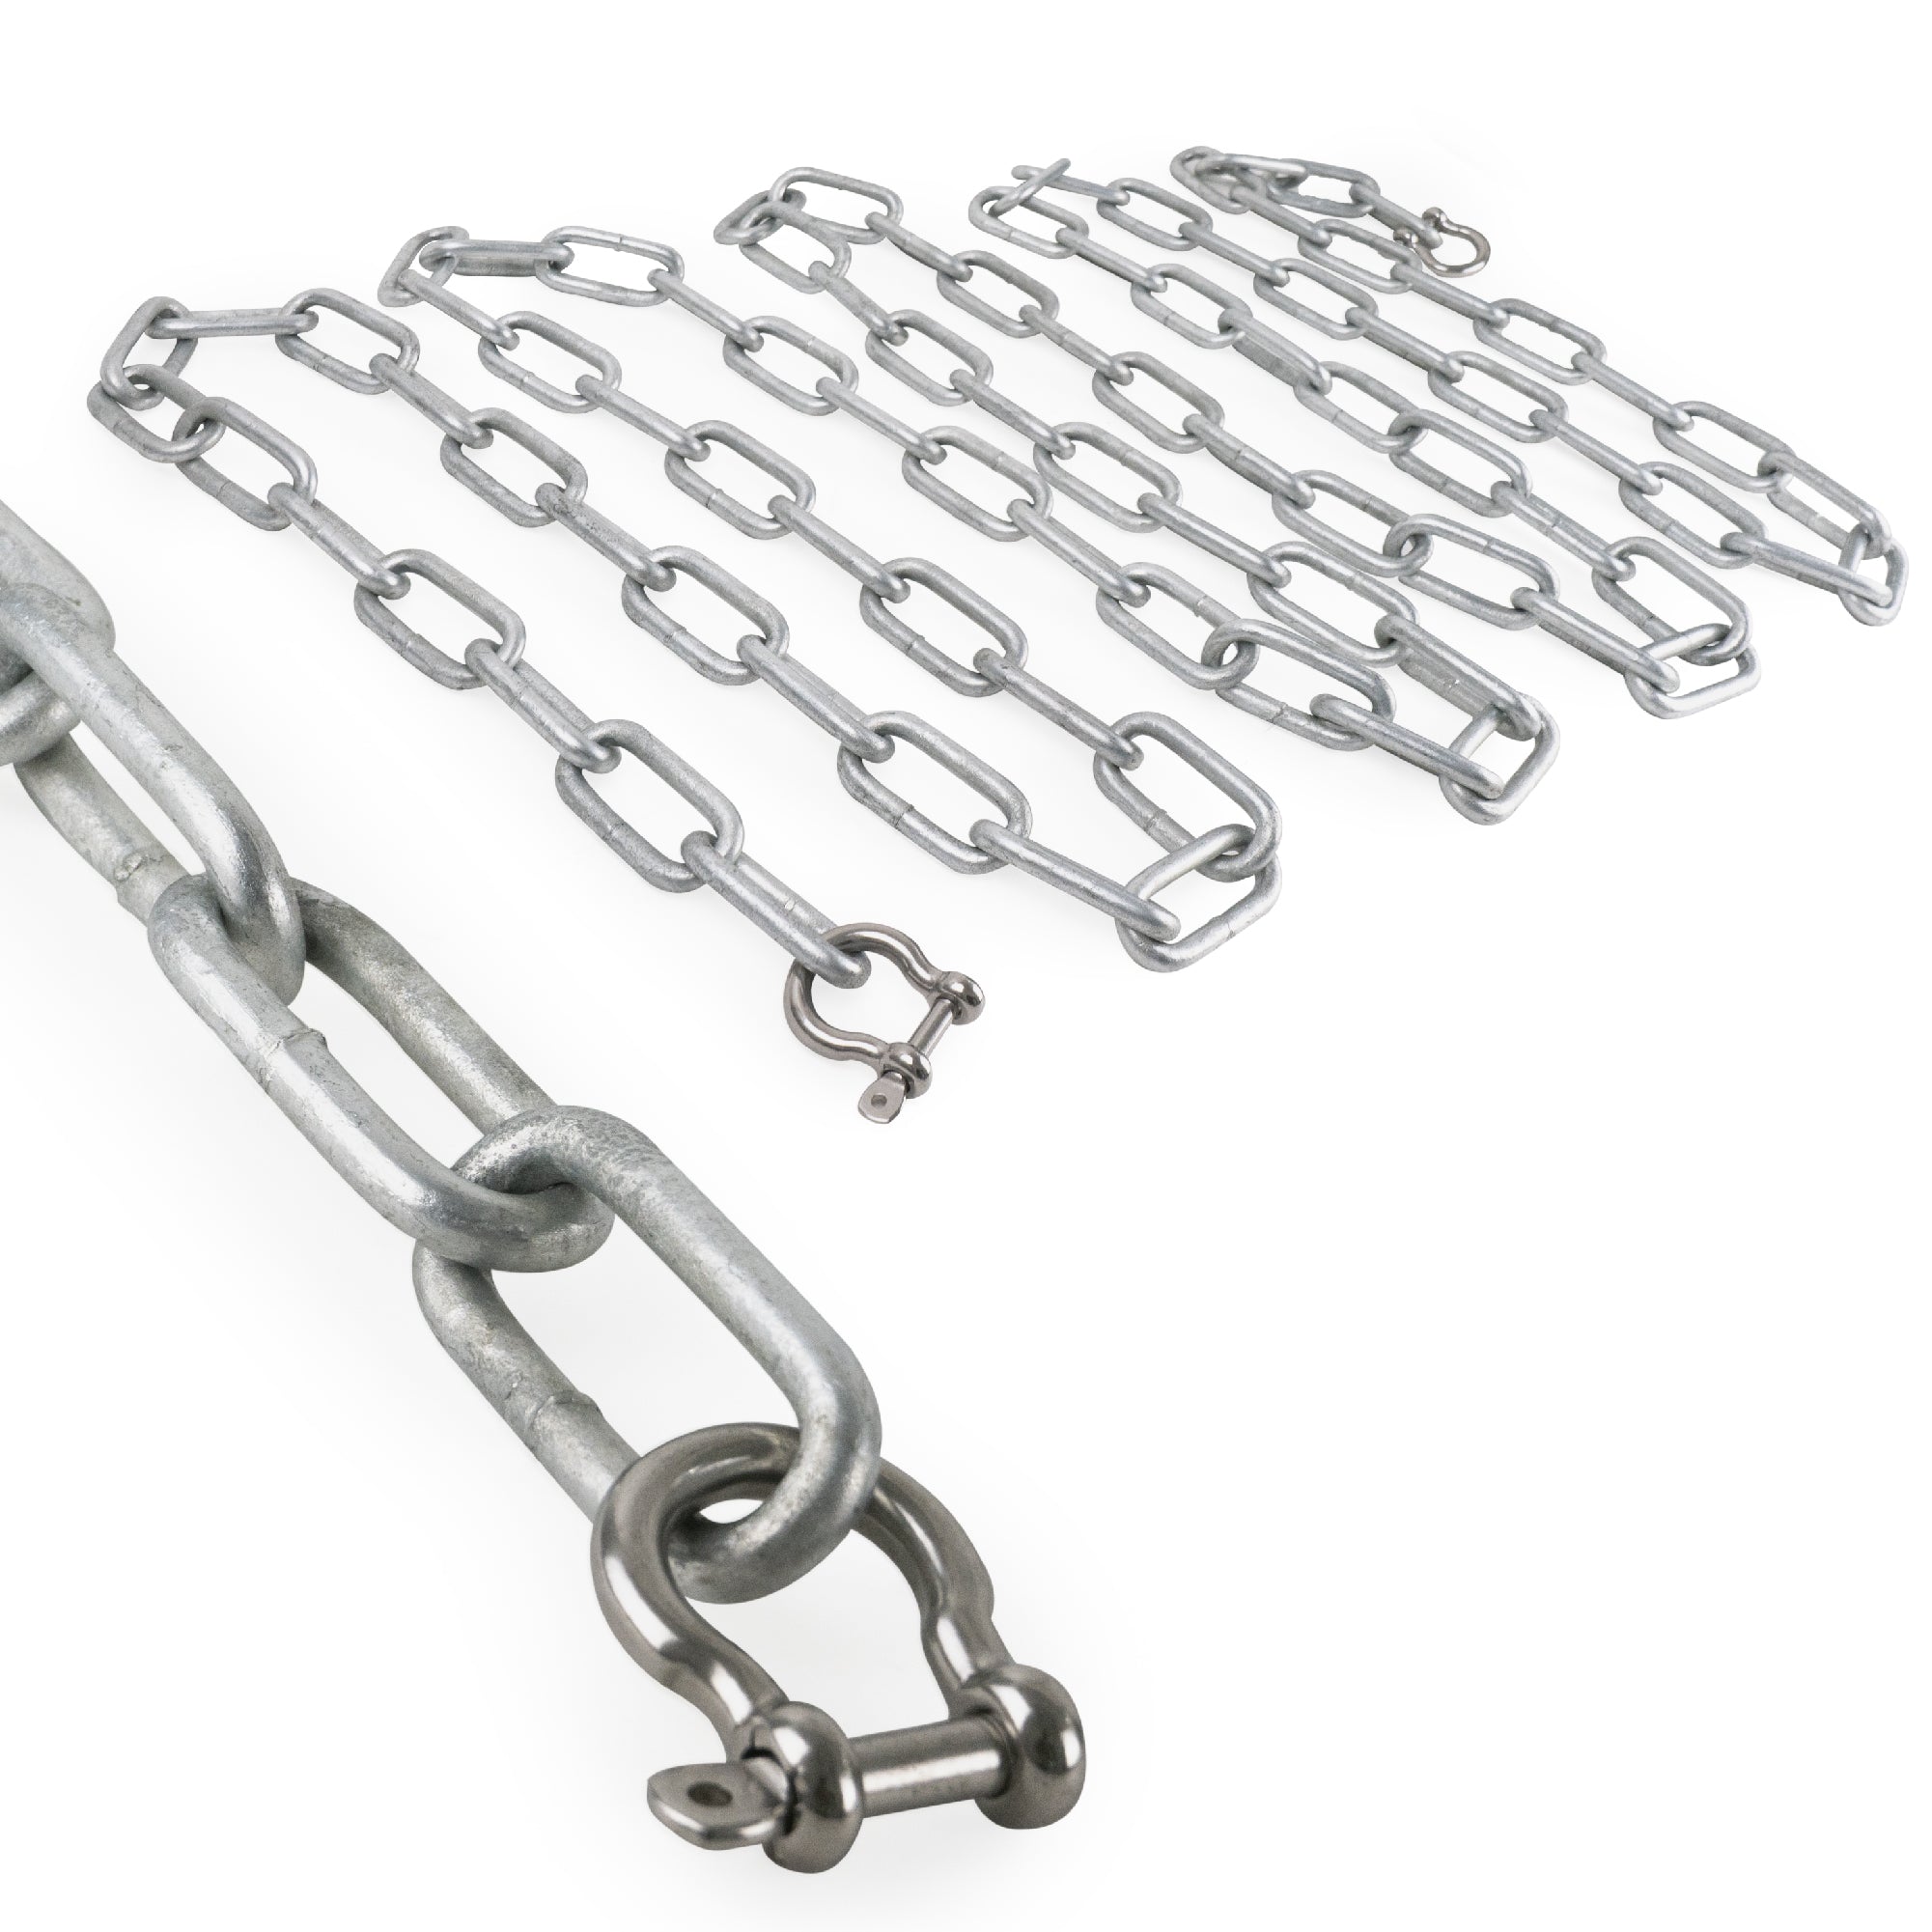 Boat Anchor Lead Chain with Shackles, 1/4 inches x 15 Feet Hot-Dipped Galvanized Steel with 2 AISI316 Stainless Steel 1/4 inches Bow Shackles FO4568-GN15